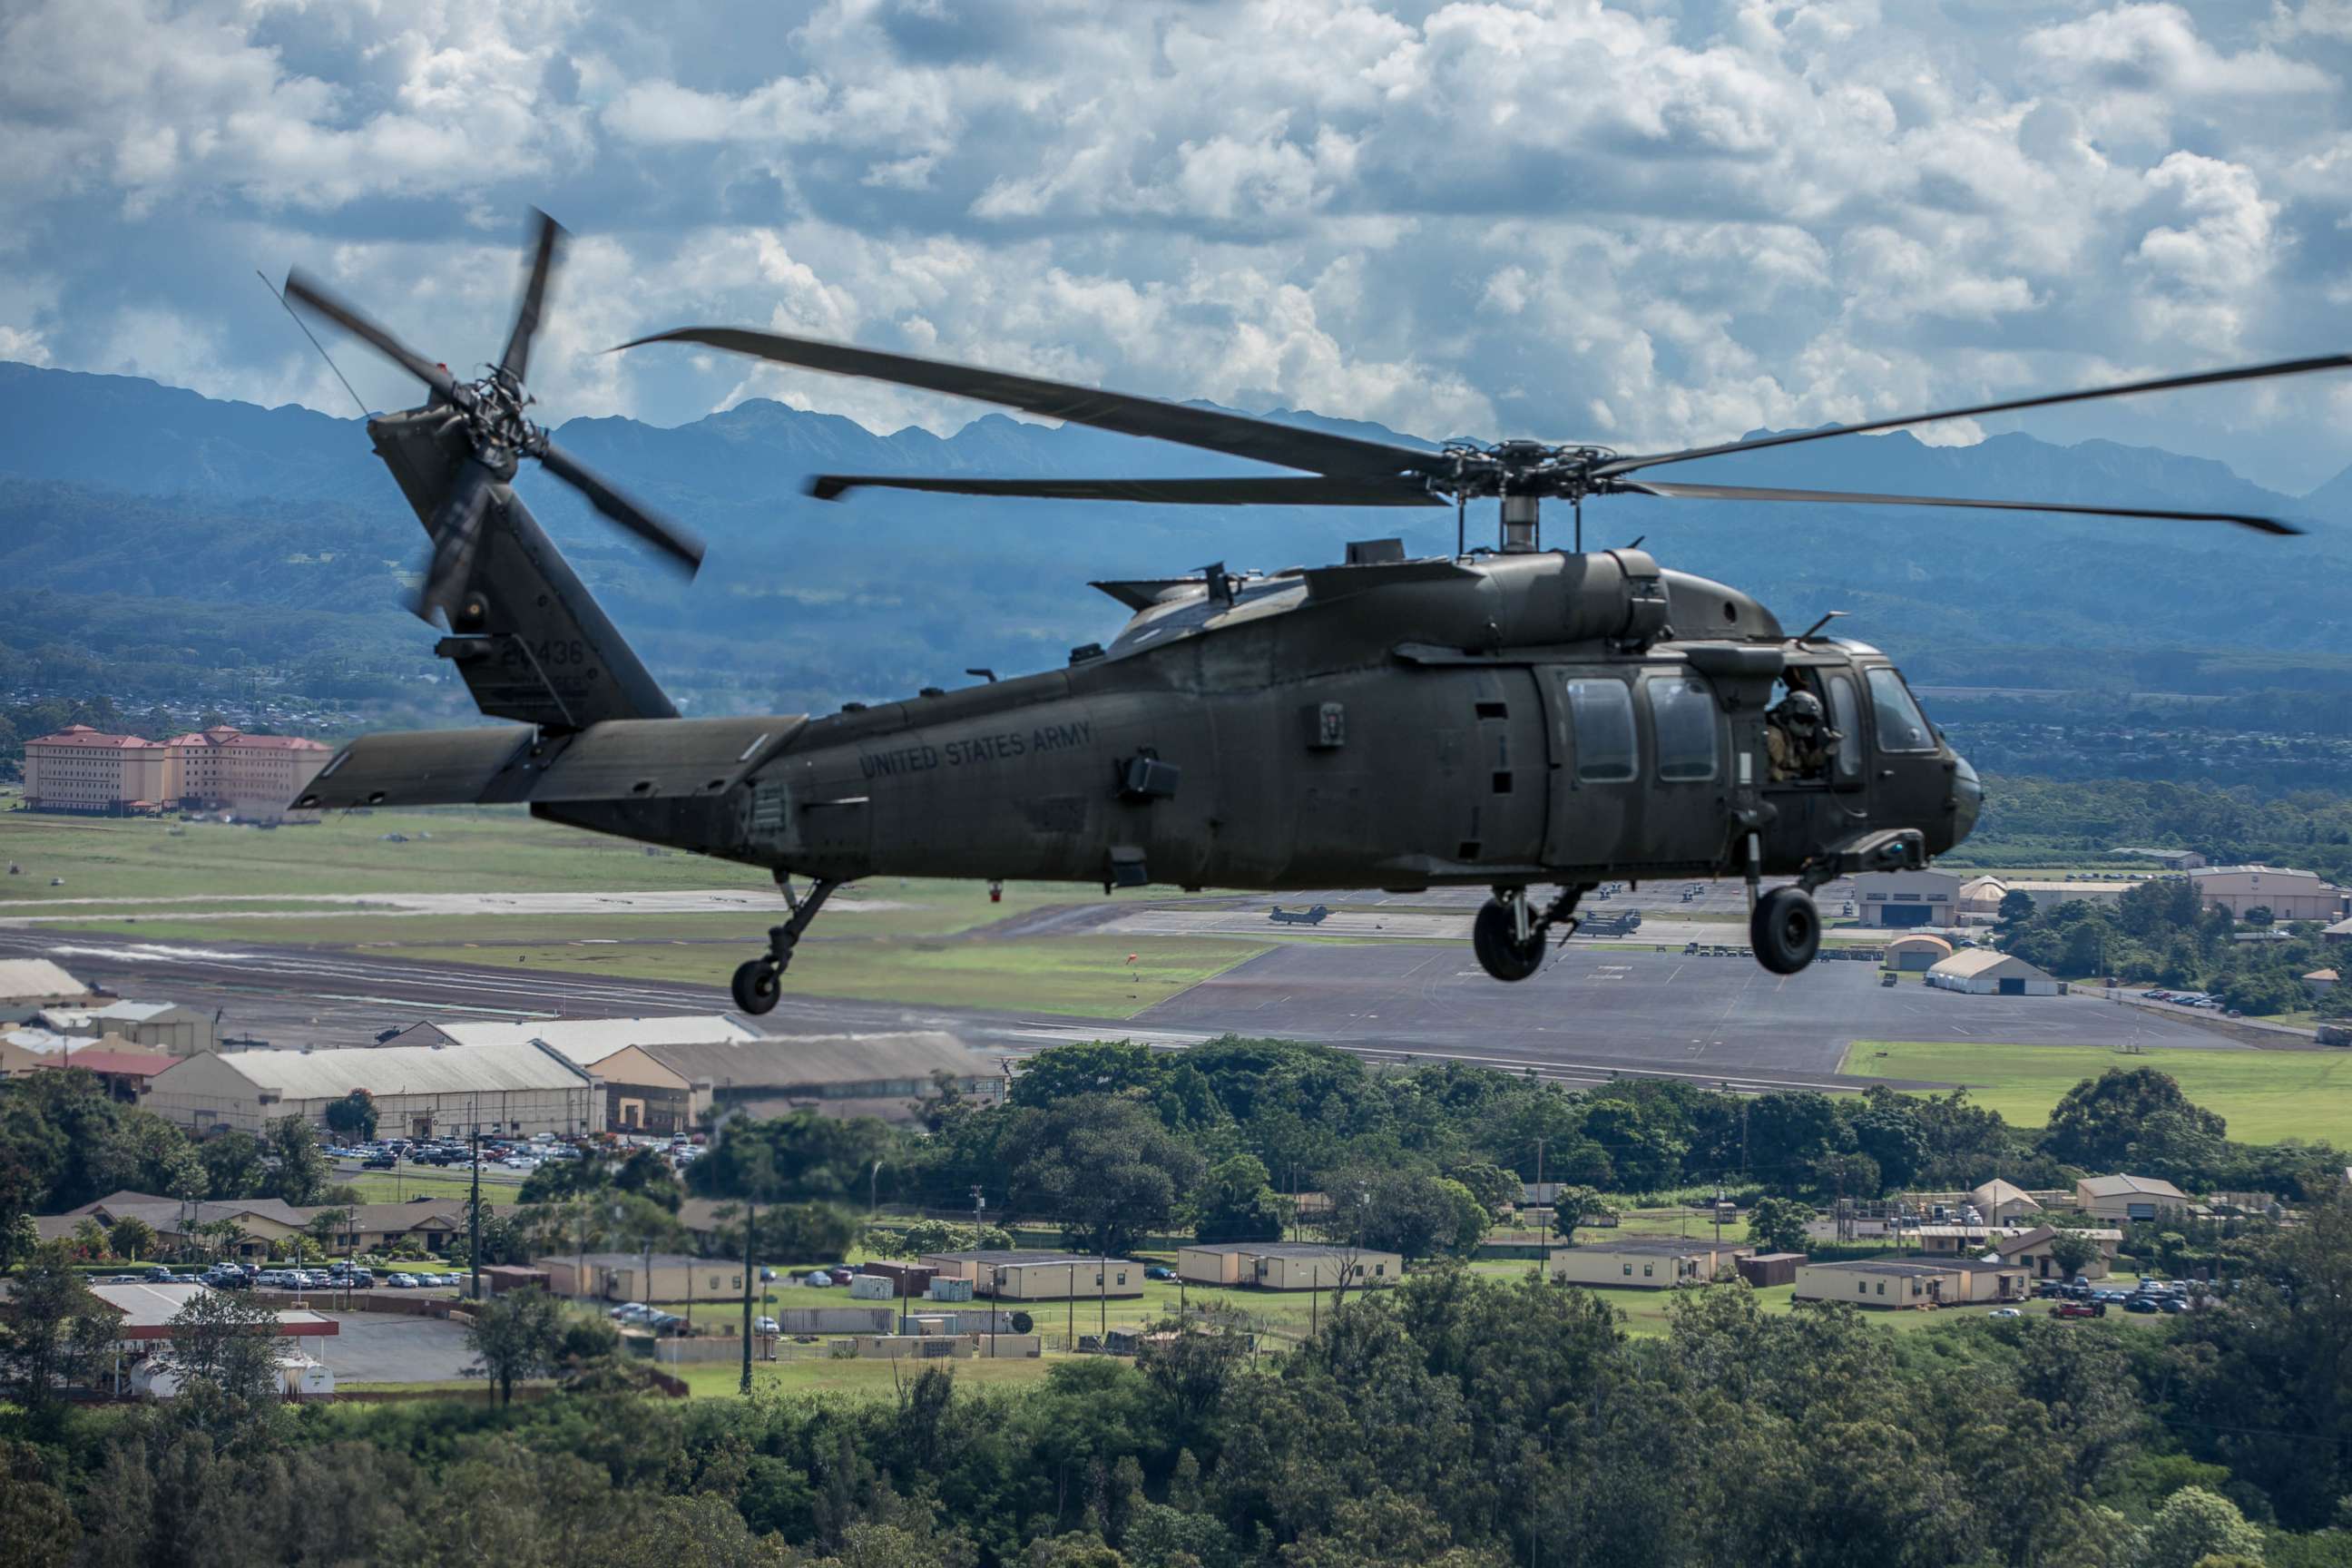 PHOTO: A UH-60 Blackhawk helicopter, Oct. 31, 2019, at Schofield Barracks, Hawaii.